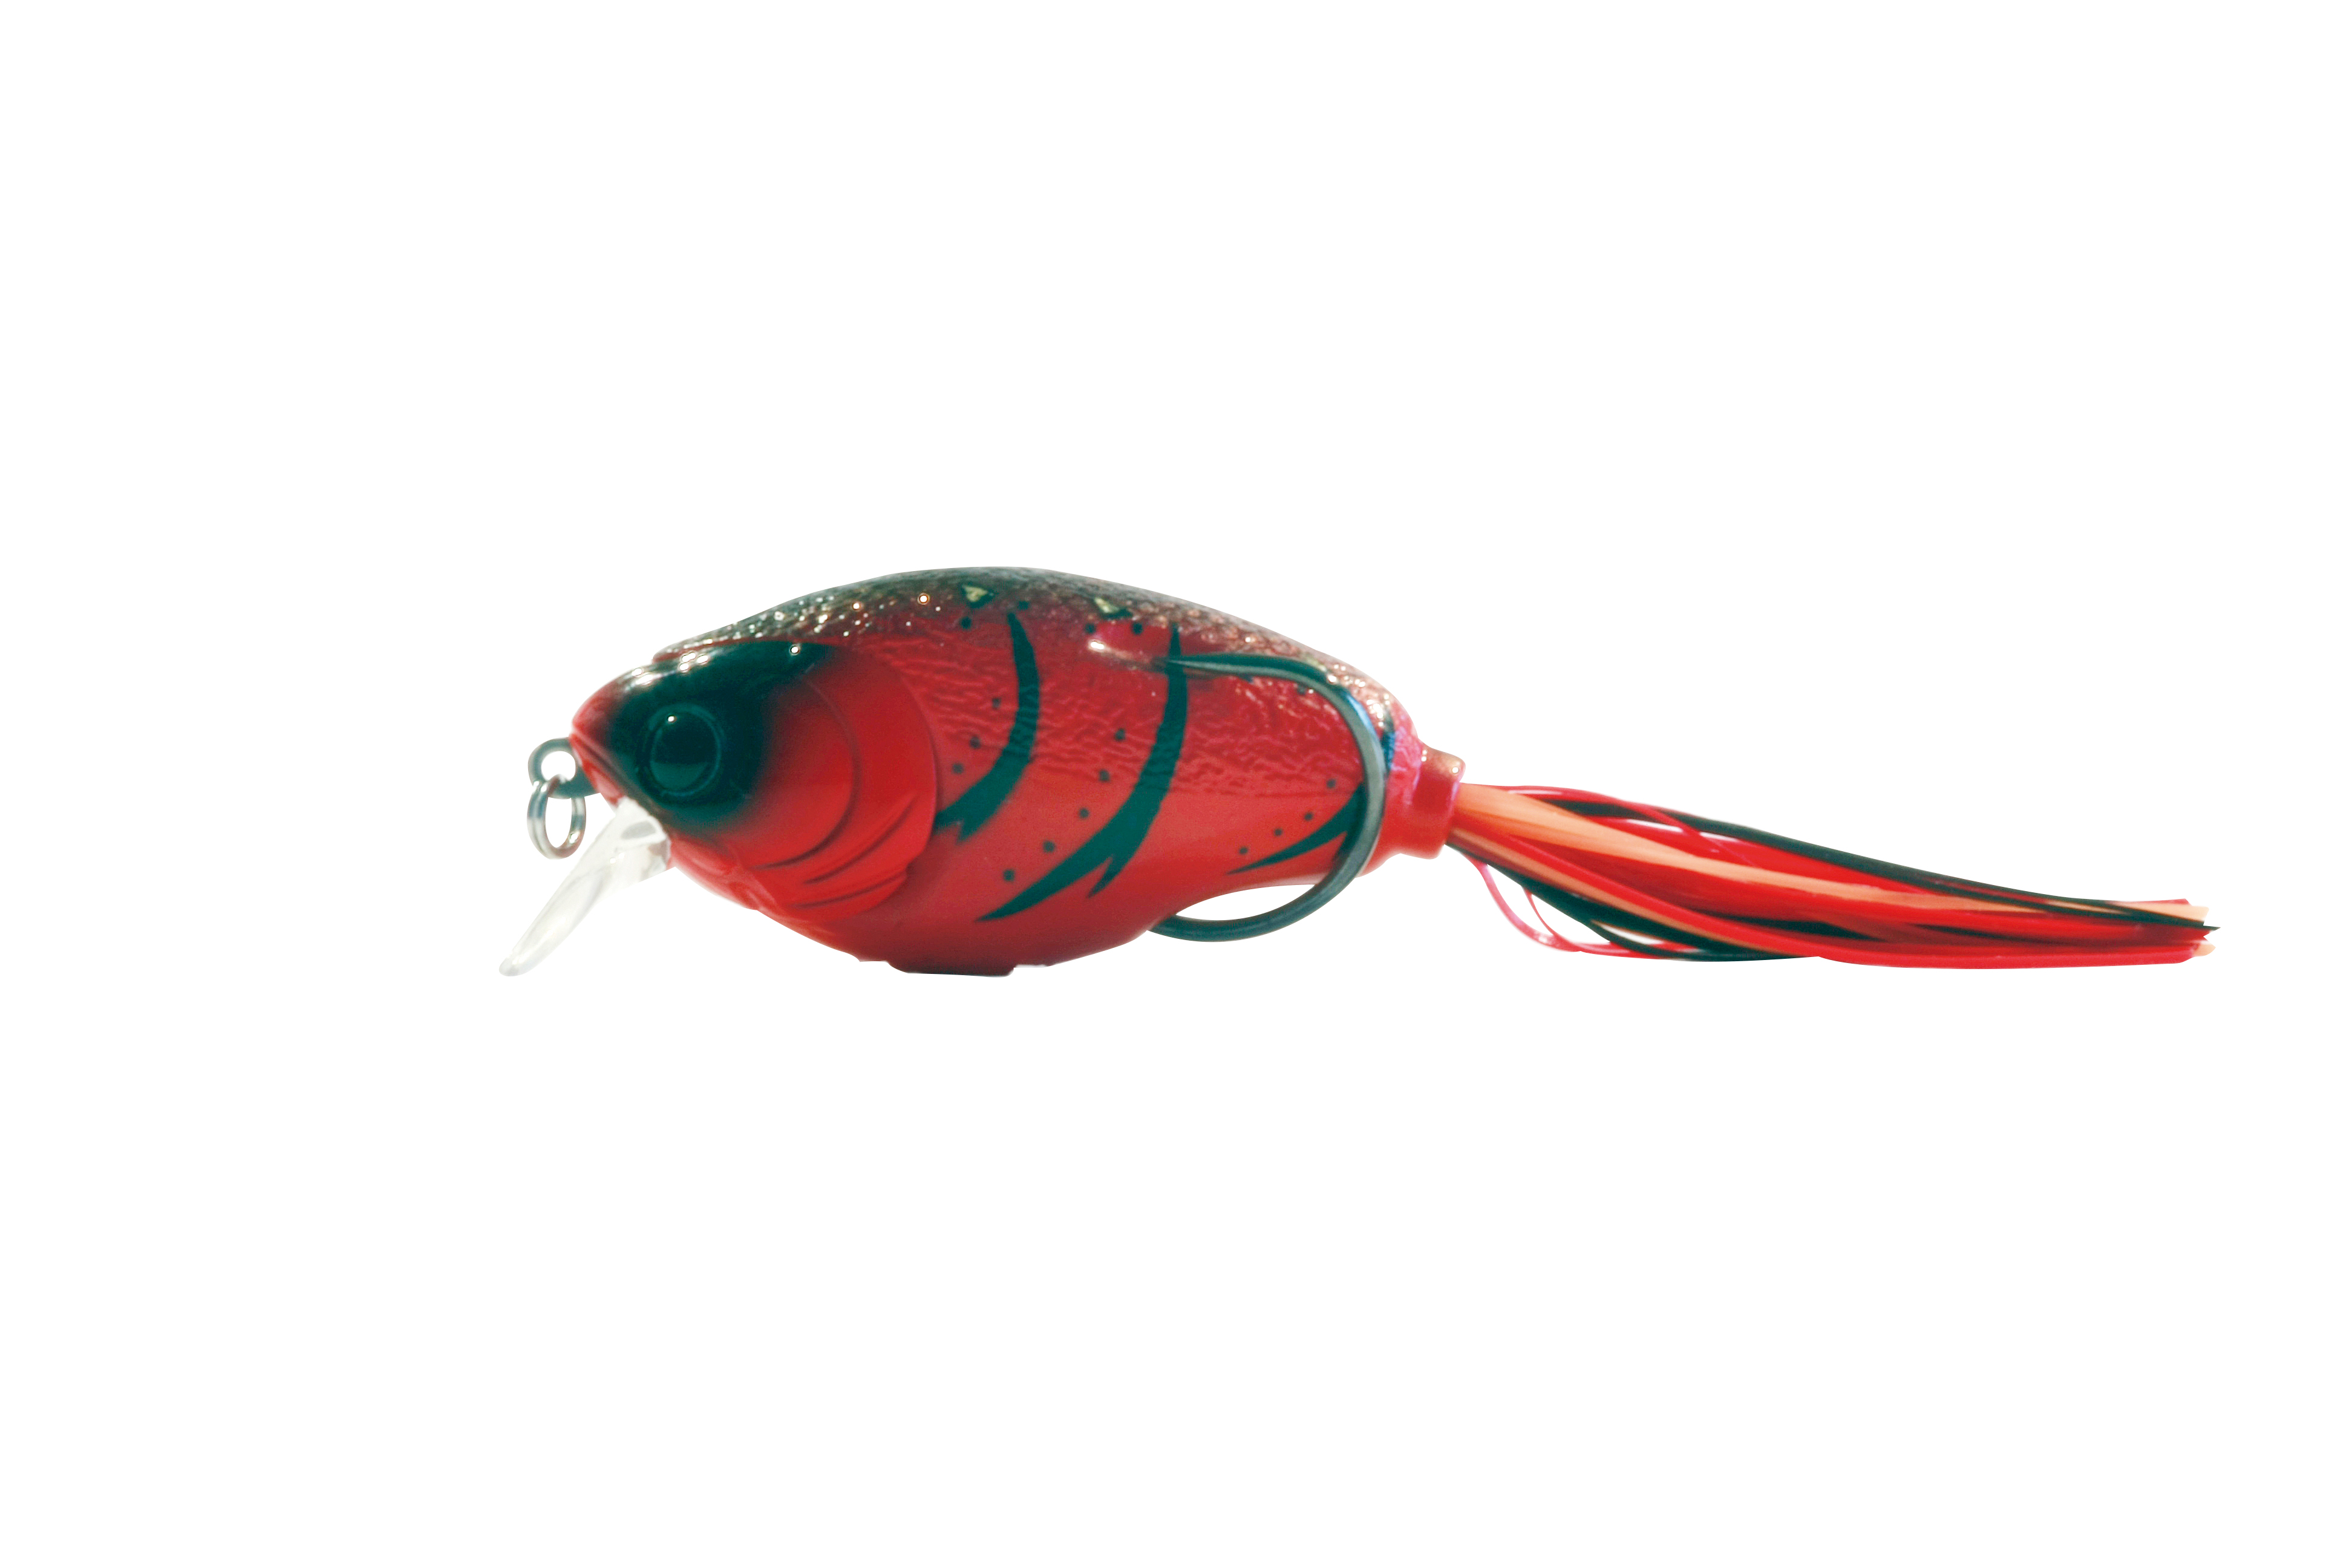 Supernato baby 45 col 59 wcc Red Craw